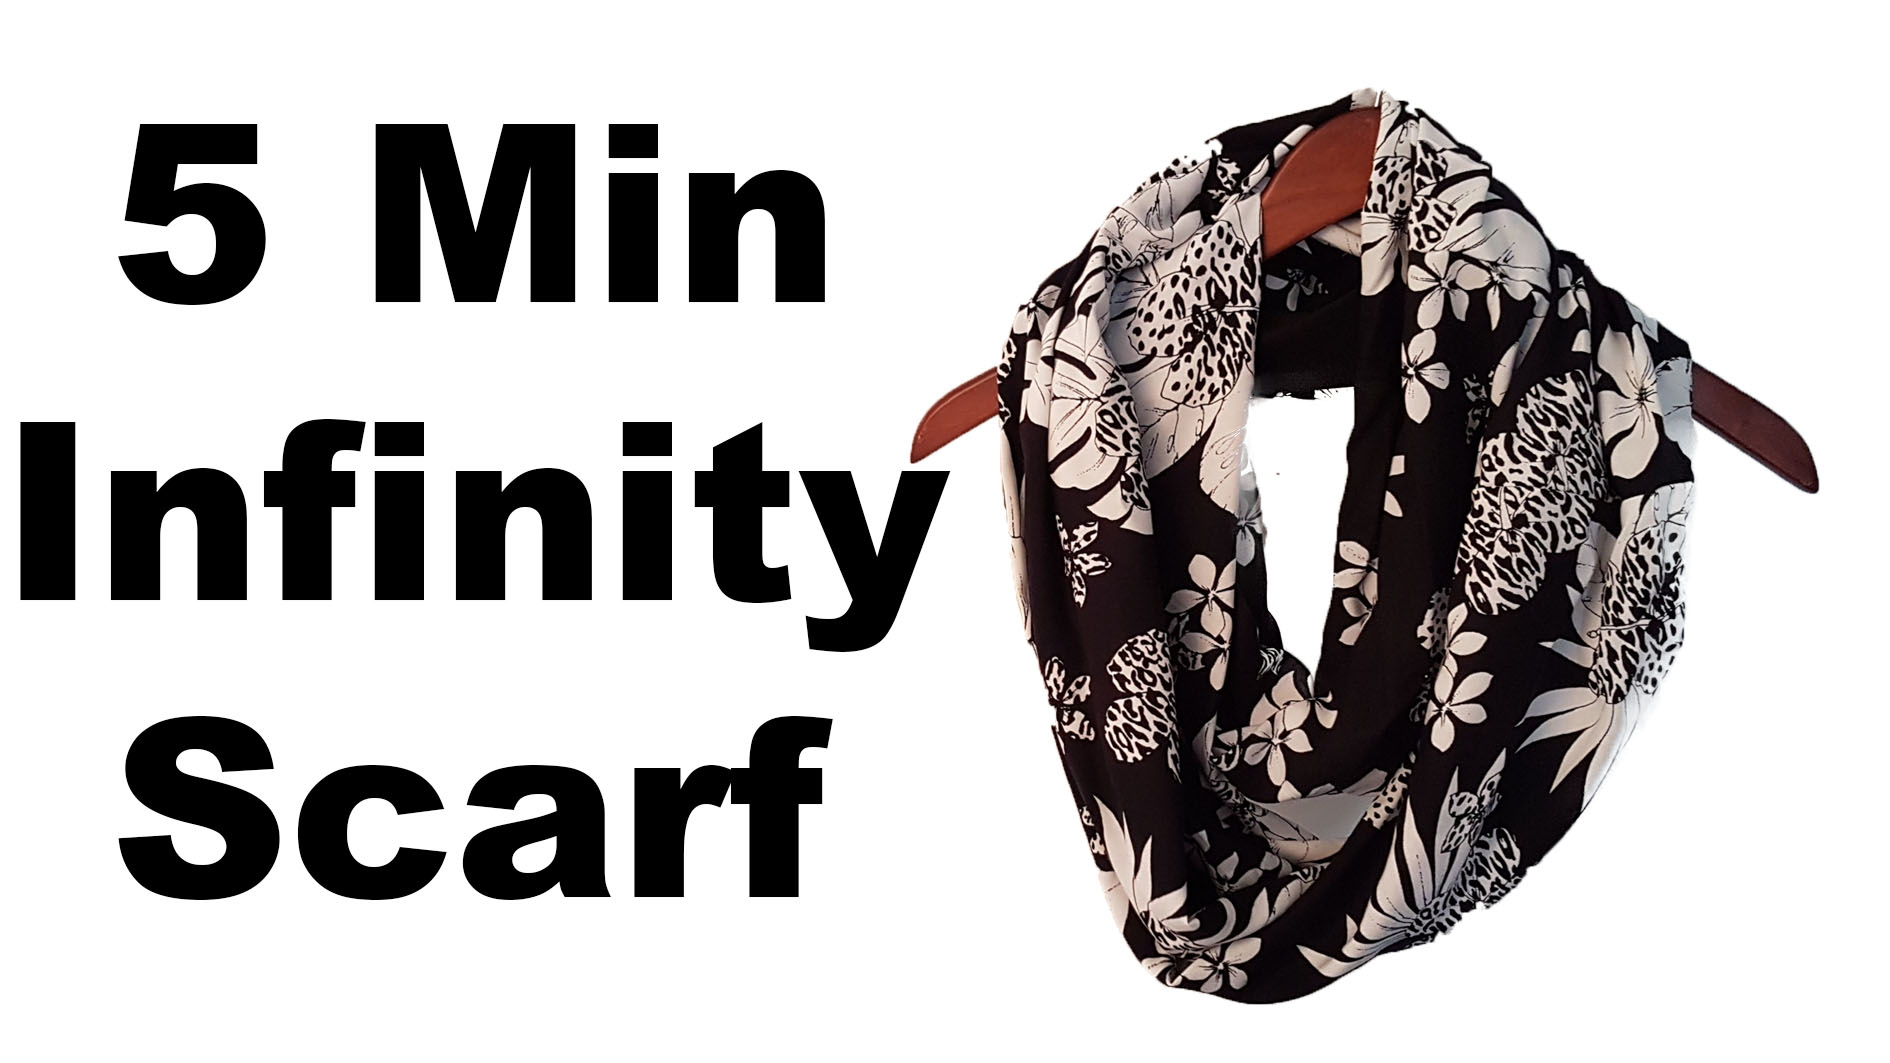 5 Minute Infinity Scarf